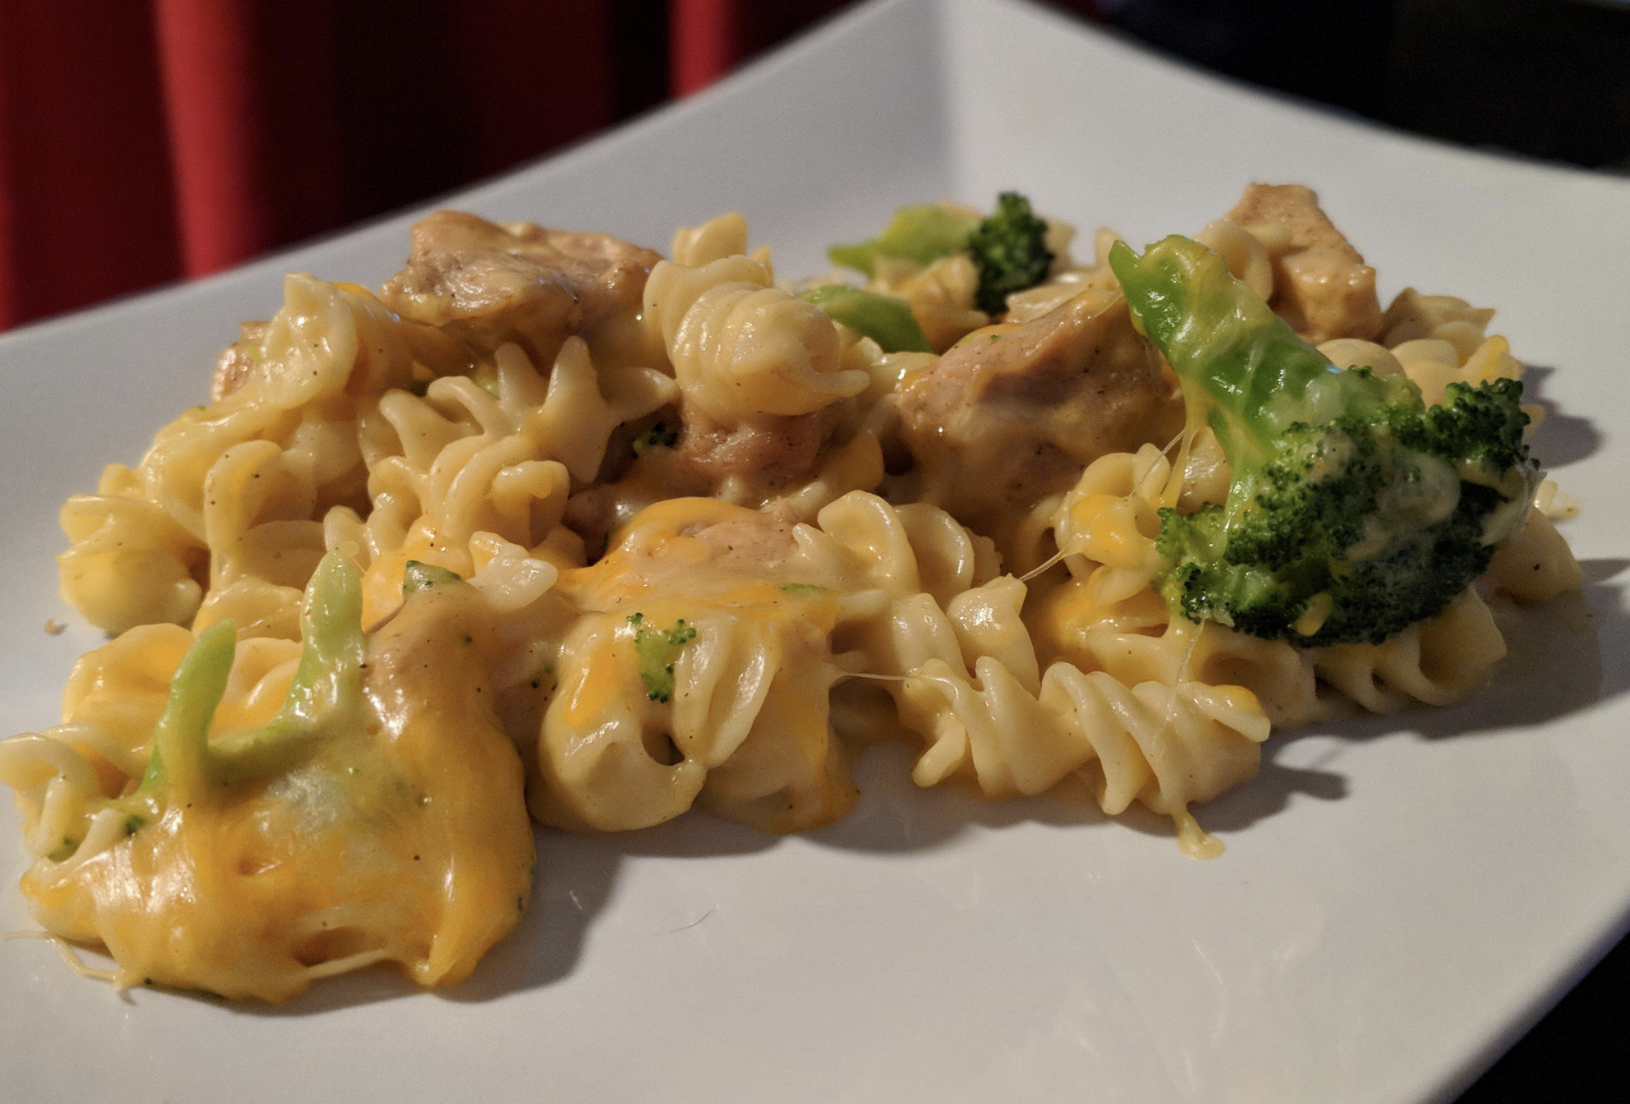 Cheesy chicken and broccoli noodles.